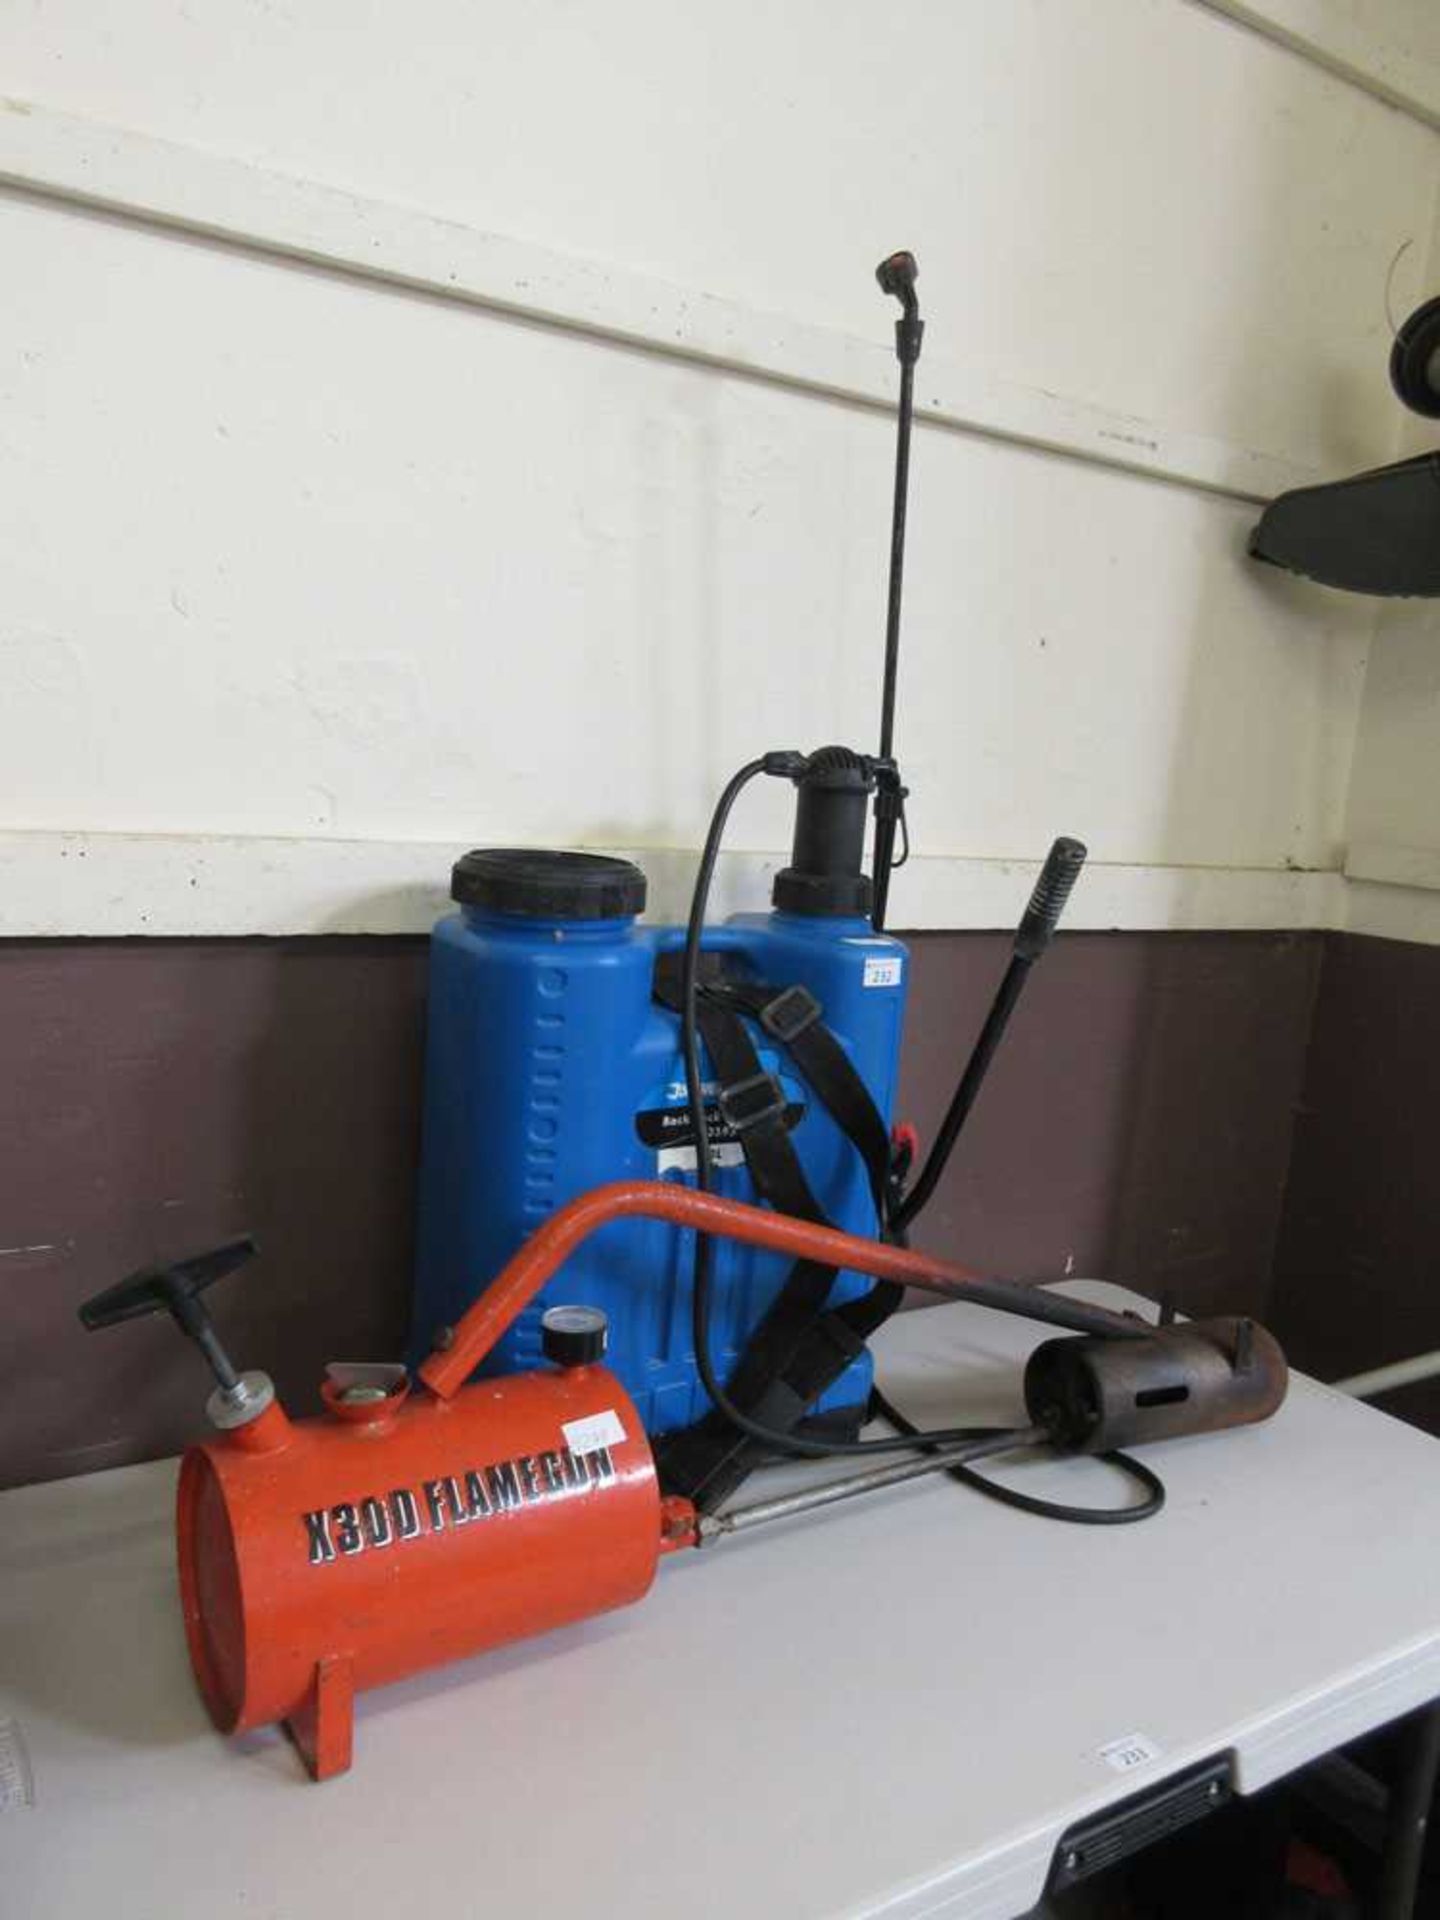 A Silverline back pack sprayer along with a flame gun